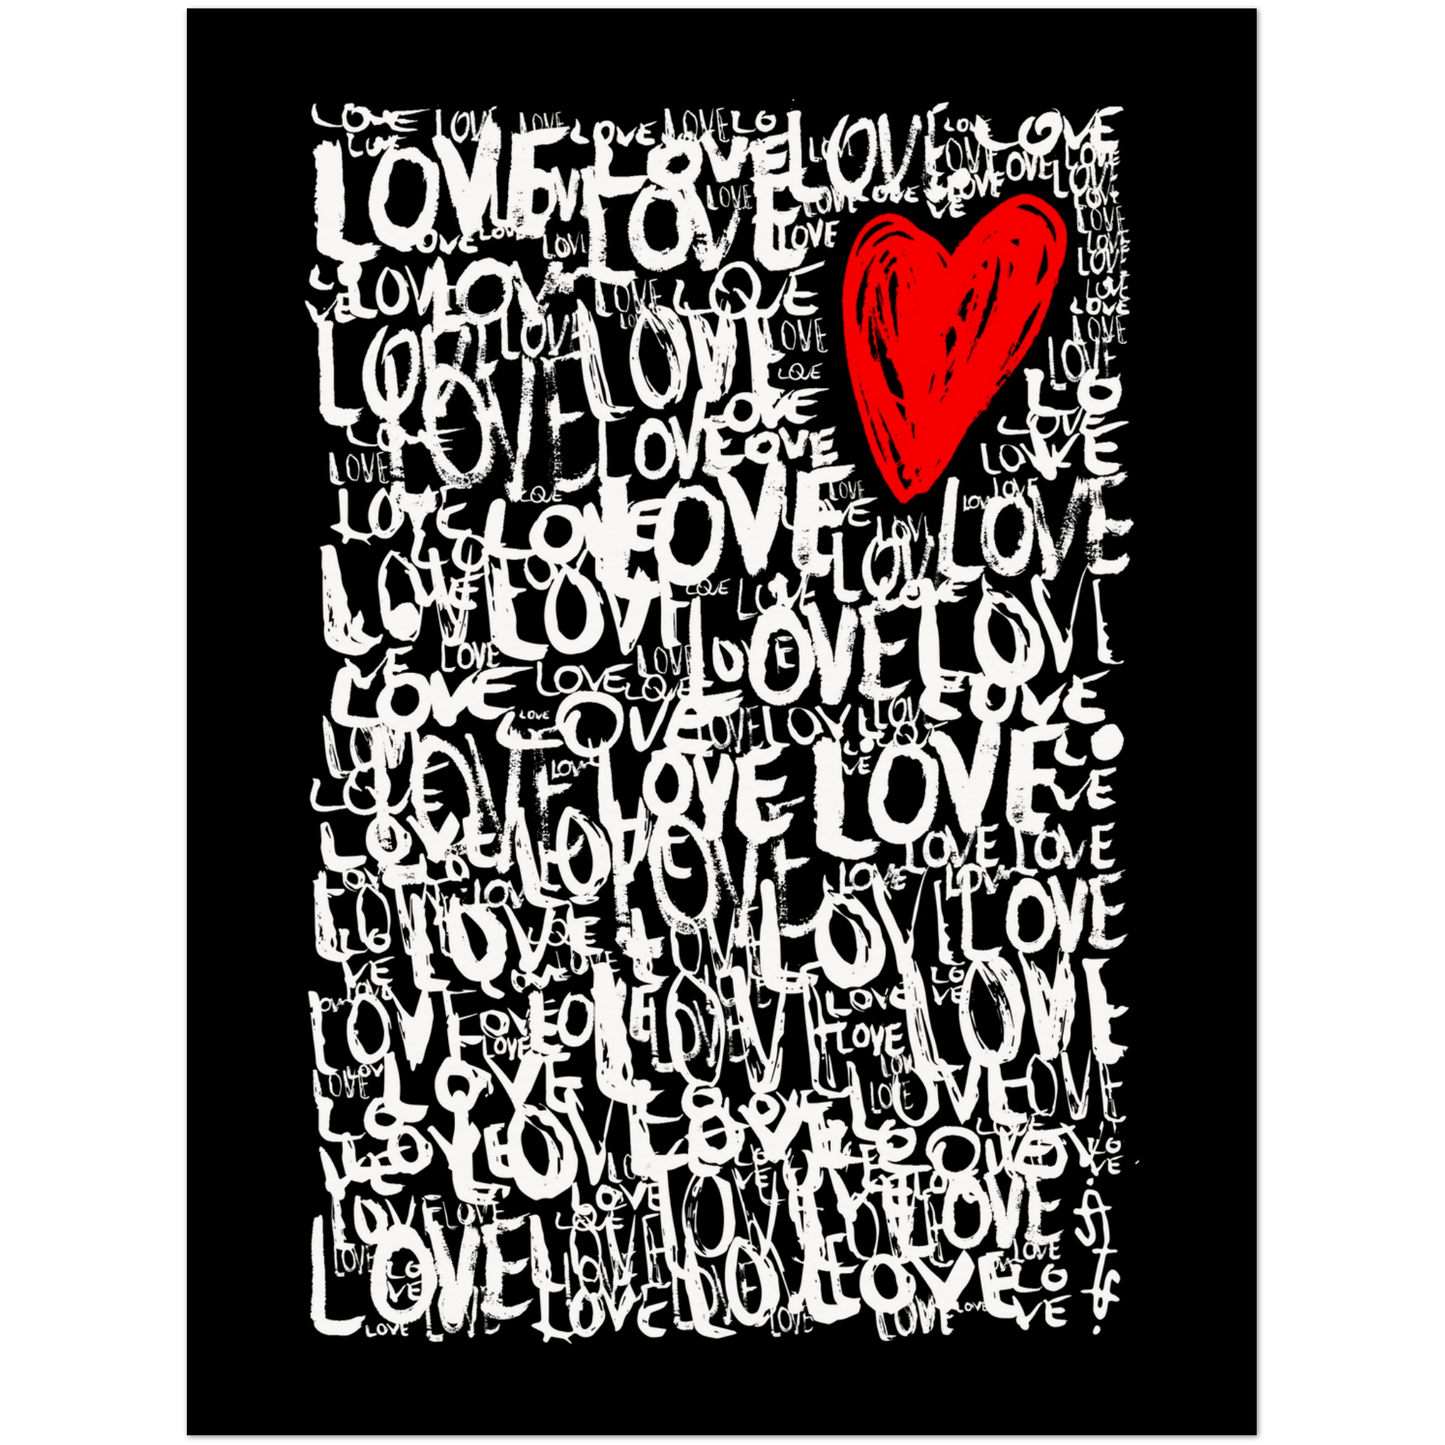 The Love - Abstract Typography Print (Black Edition) Art Prints 45x60 cm / 18x24″ / Premium Semi-Glossy Paper Poster